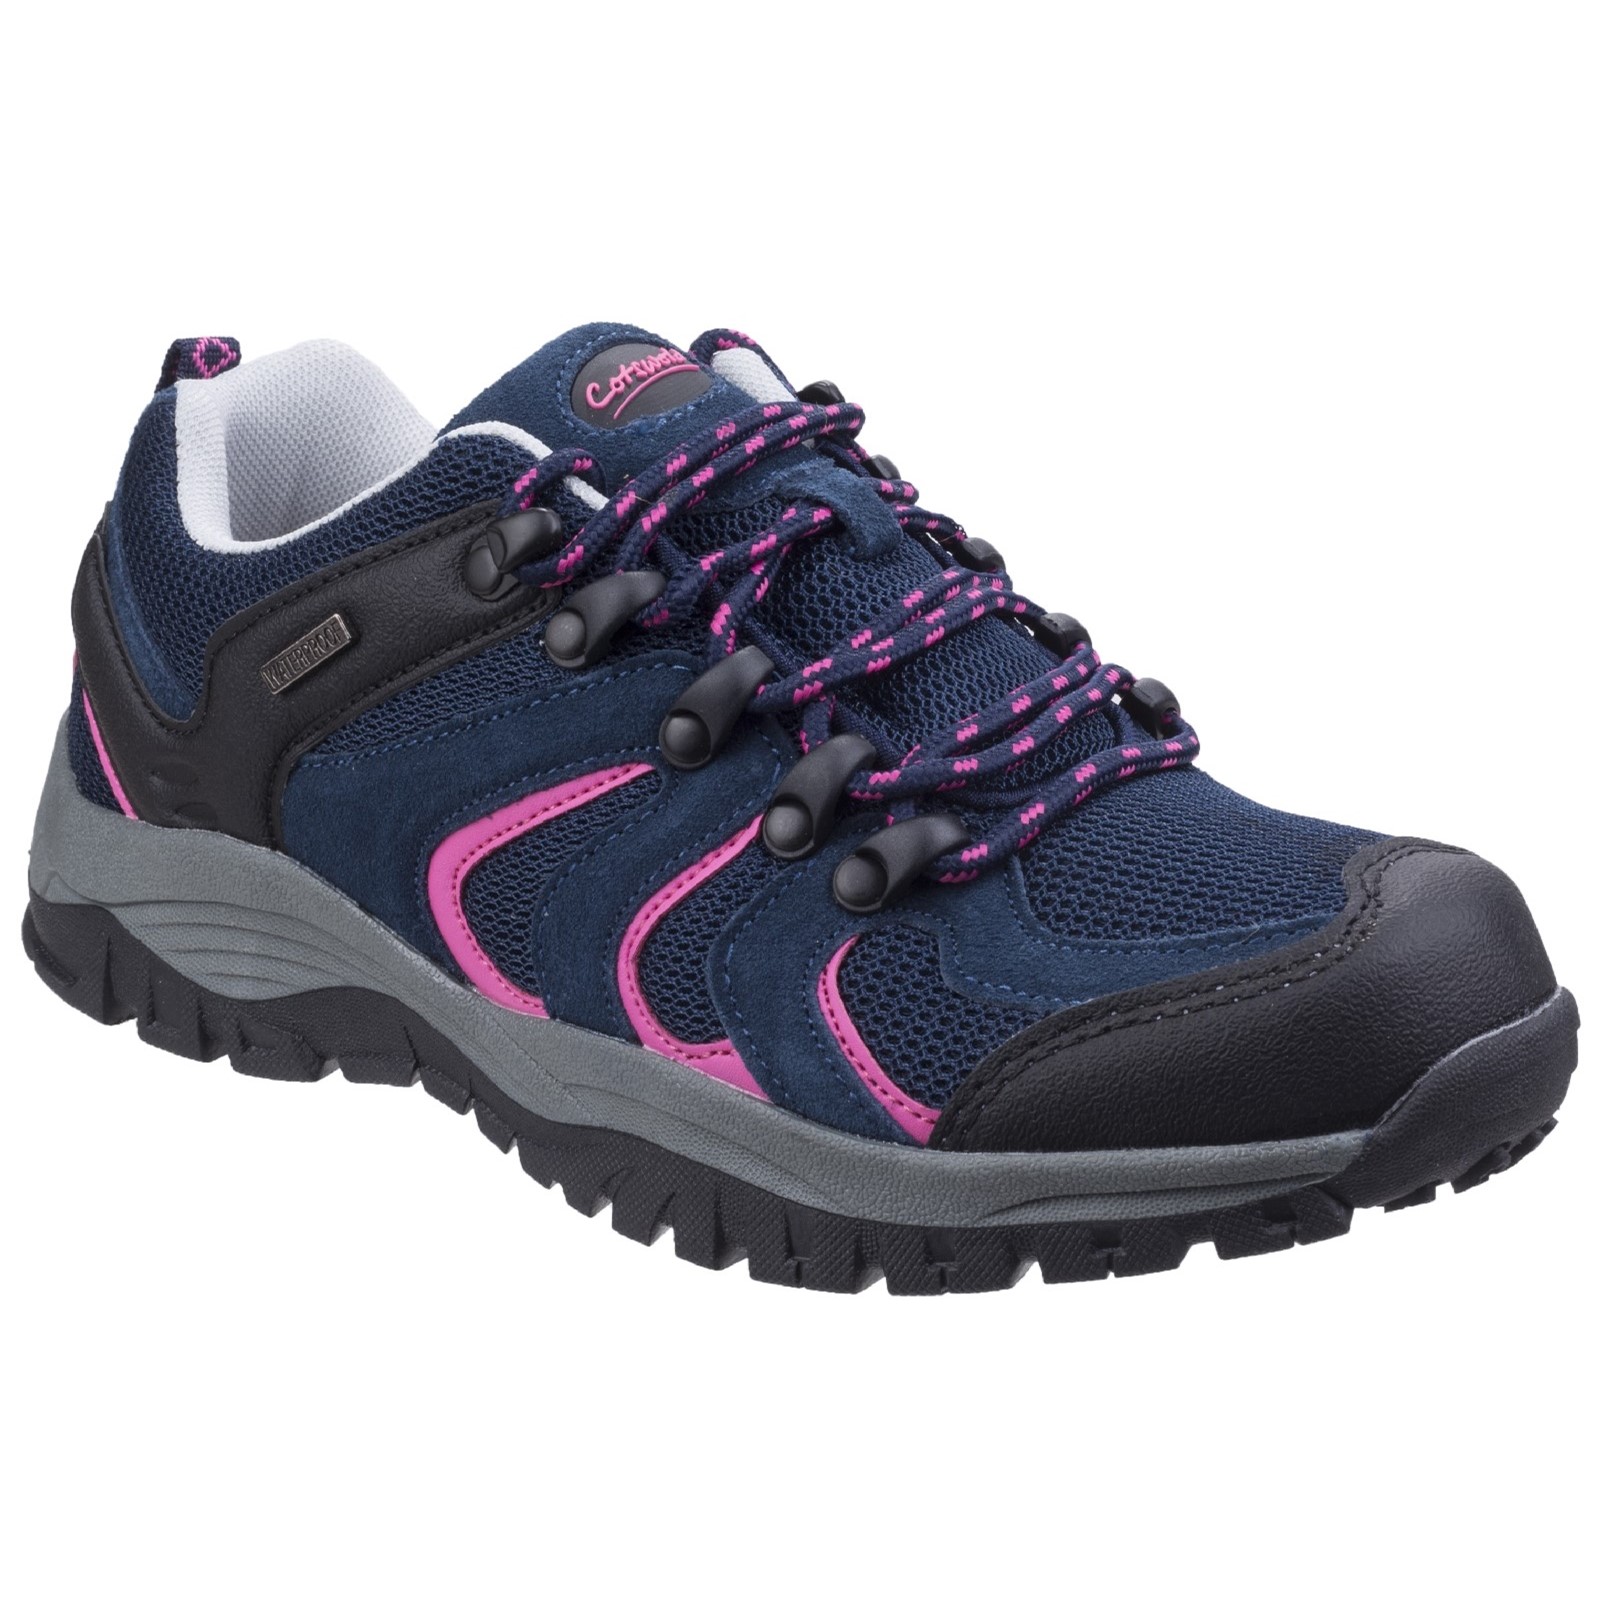 Stowell Low Hiking Shoe